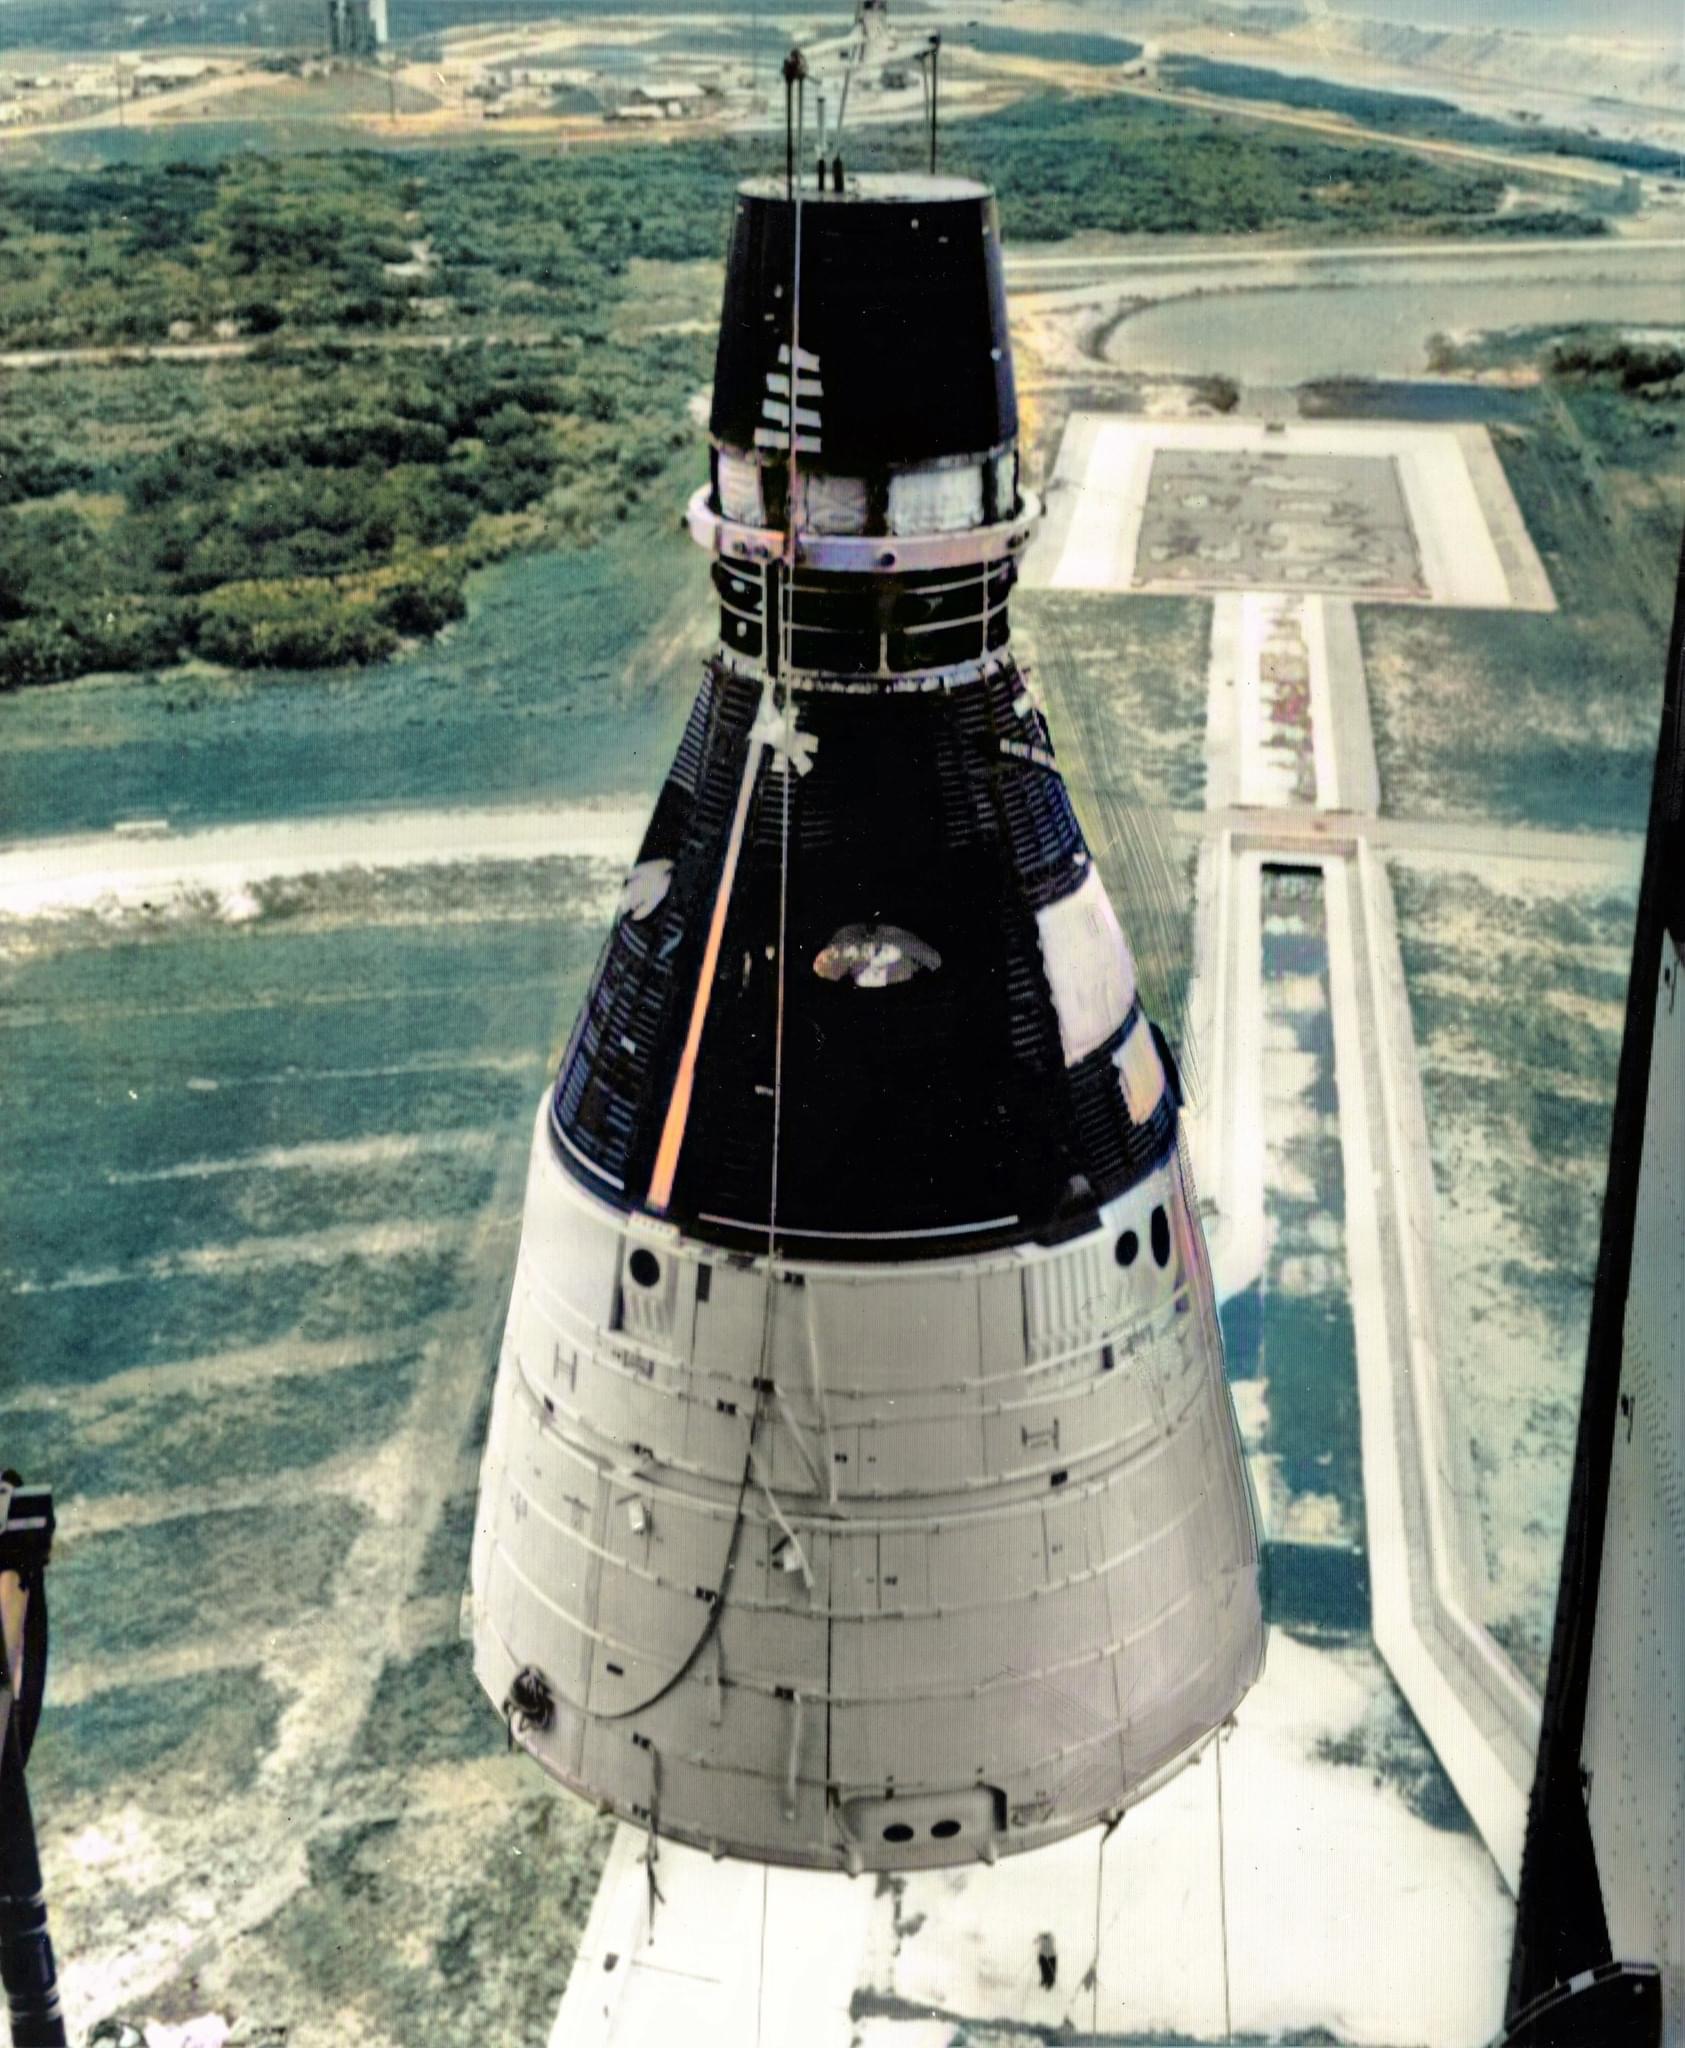 Workers lift Gemini 1 to mate it with its Titan II rocket